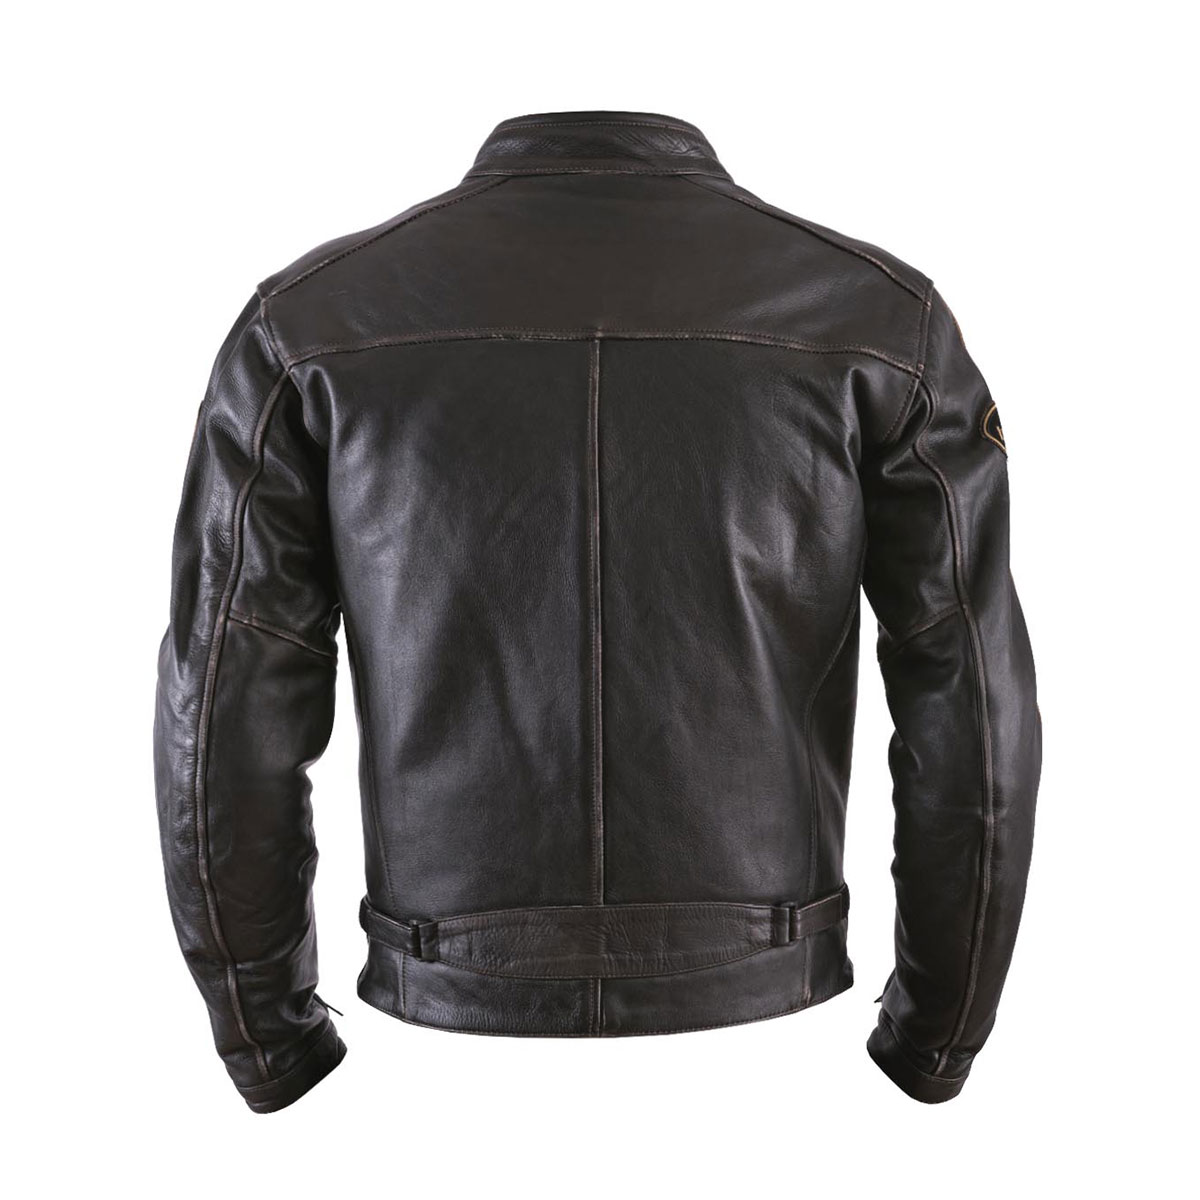 Helstons Ace Oldies Brown Leather Motorcycle Jacket